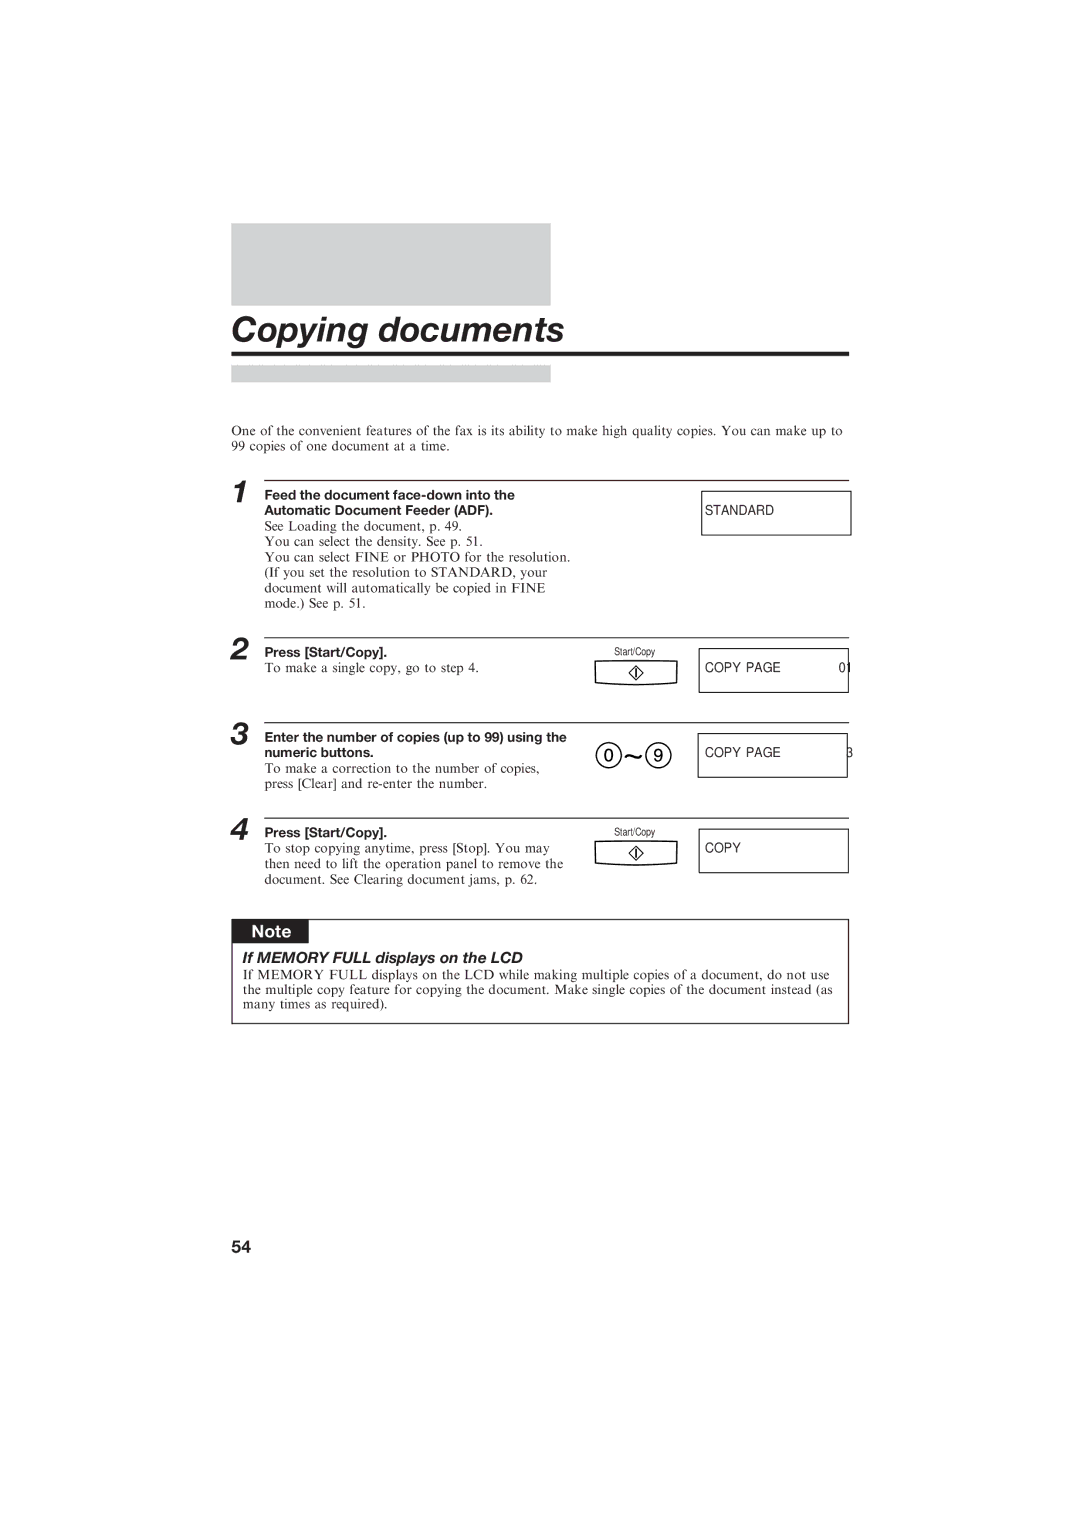 Canon B155 manual Copying documents, Enter the number of copies up to 99 using Numeric buttons 